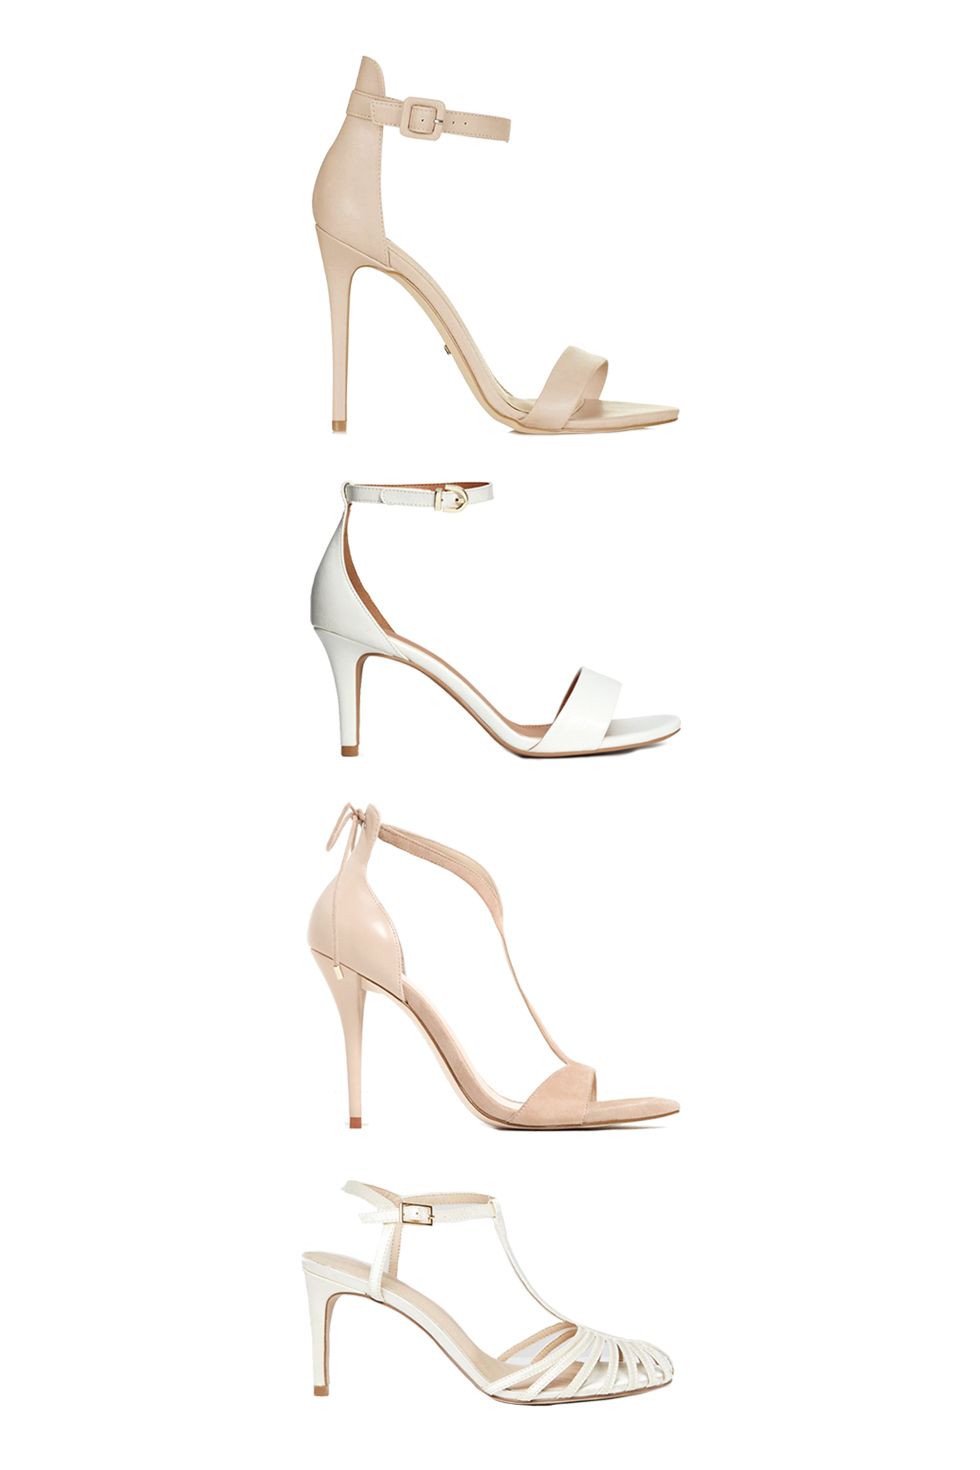 25 Wedding Shoes for Every Type of Bride - Find Ivory, Blue, Flat